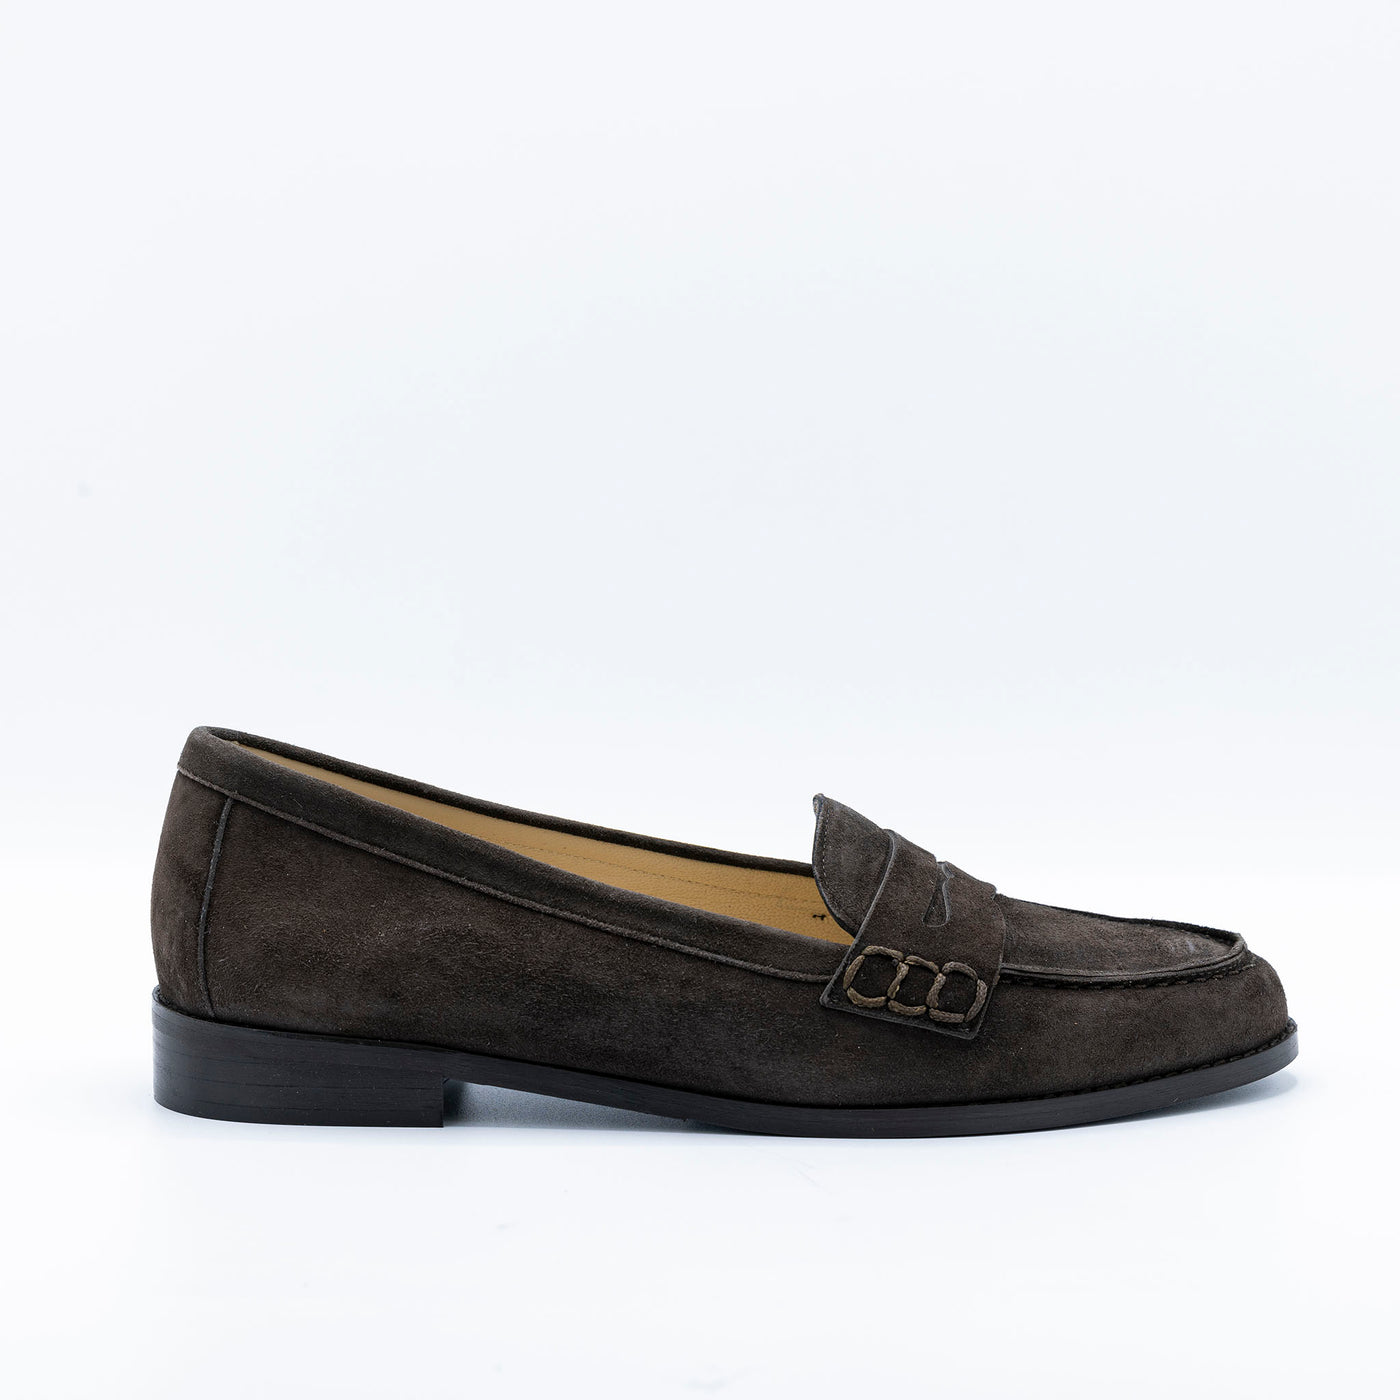 Classic Penny Loafer in Deep Brown suede. 